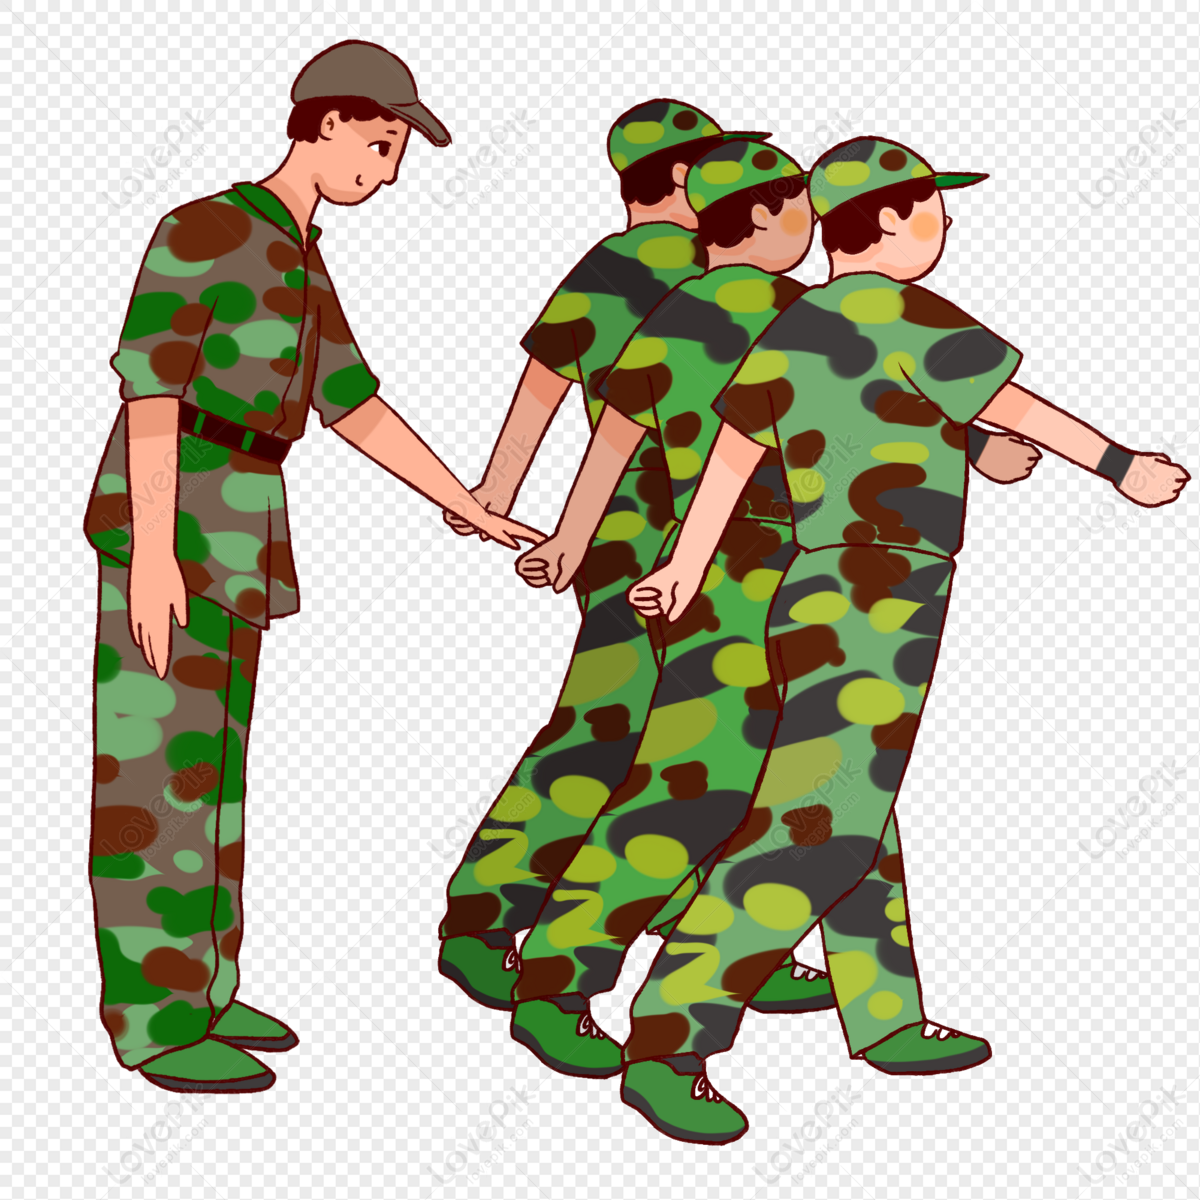 Military Training PNG Transparent Background And Clipart Image For Free  Download - Lovepik | 401591370